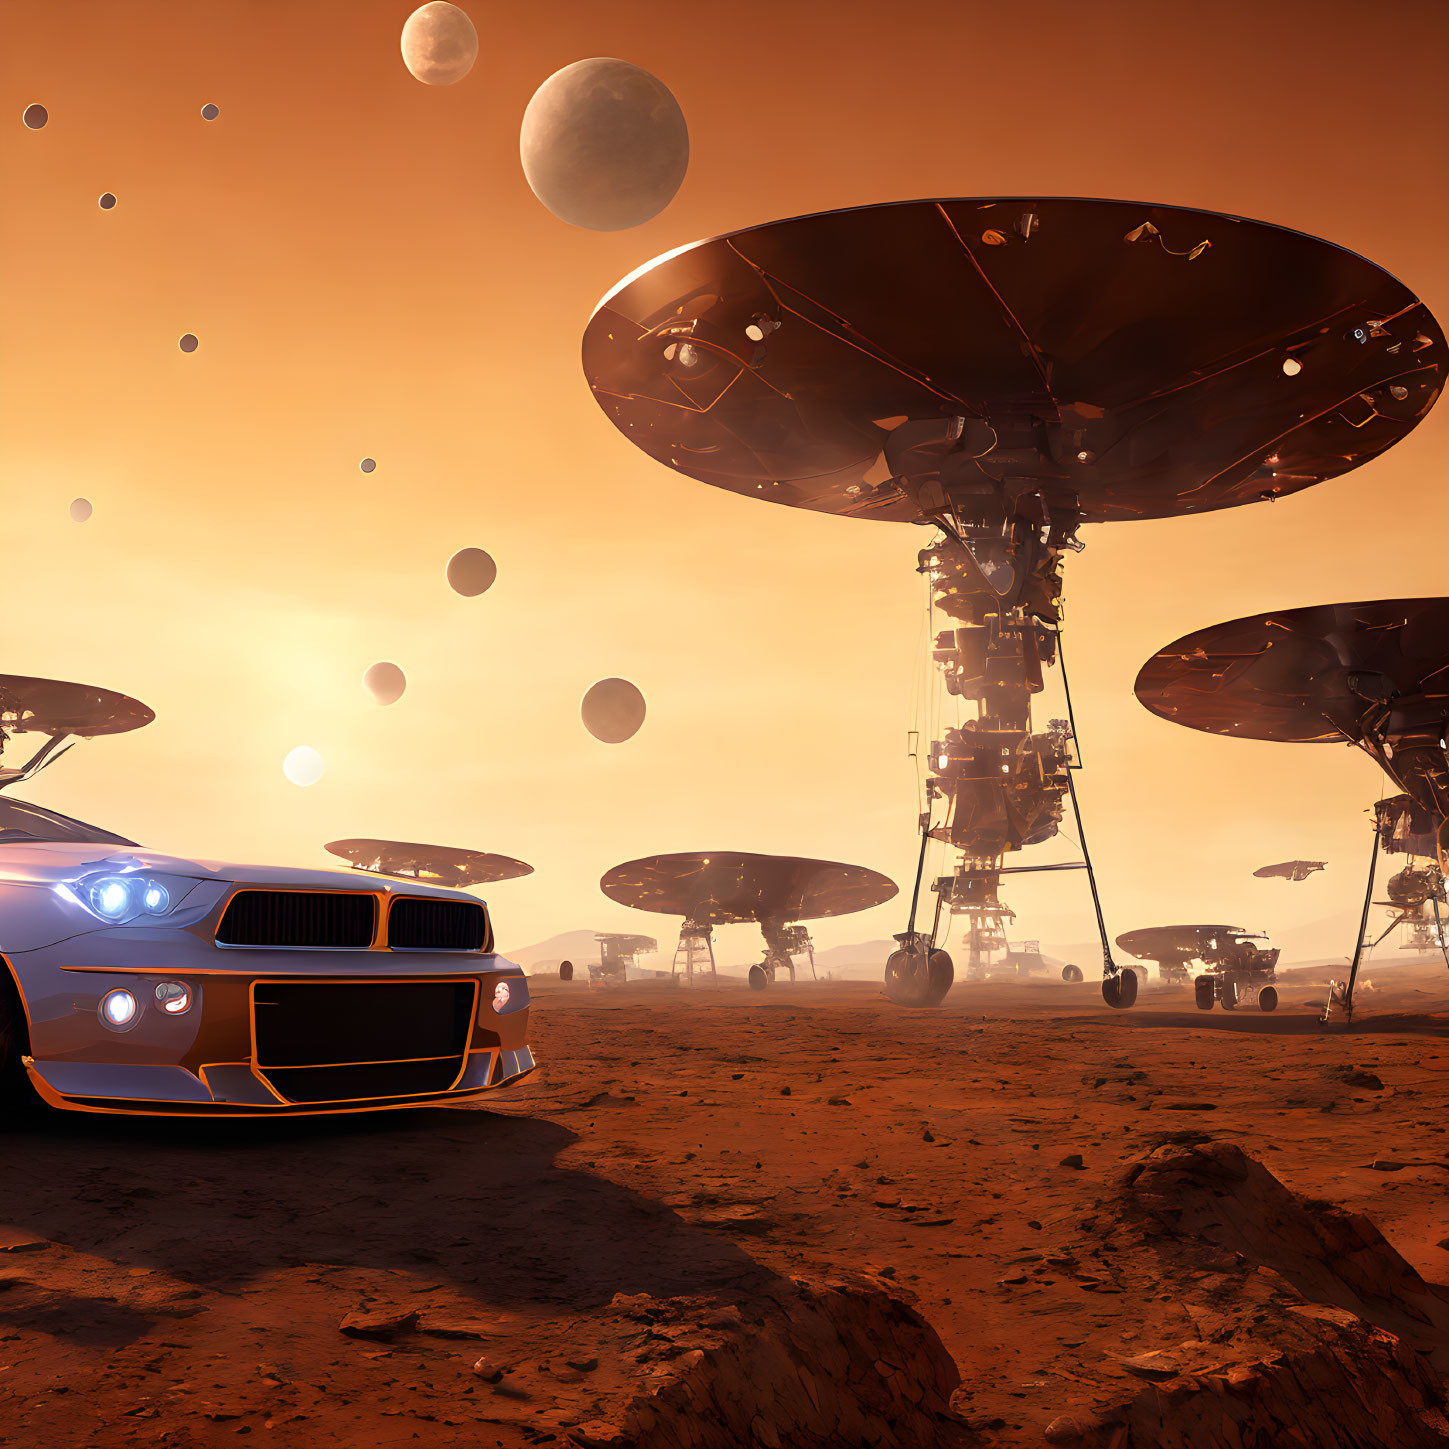 Futuristic car on alien planet with floating structures & multiple moons